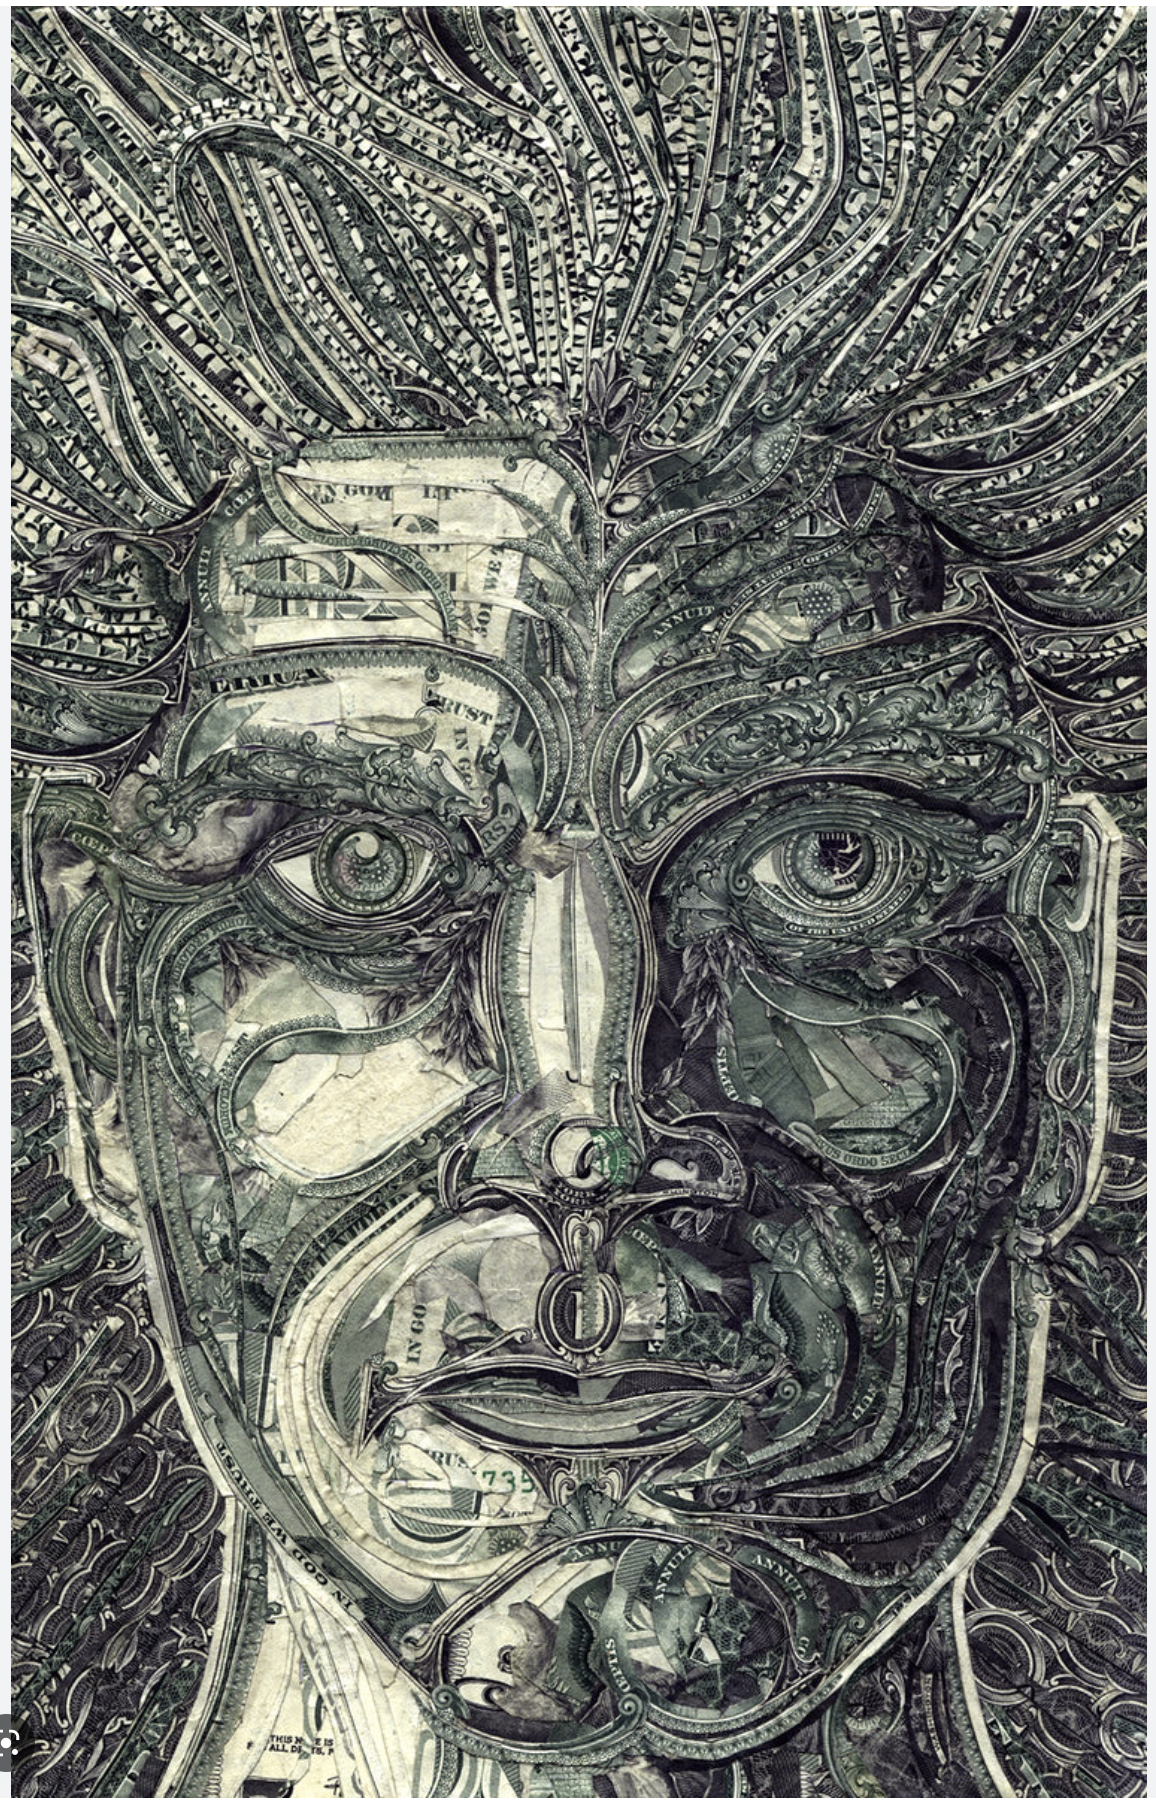 A self-portrait made out of U.S. currency by Madison-based artist C.K. Wilde.